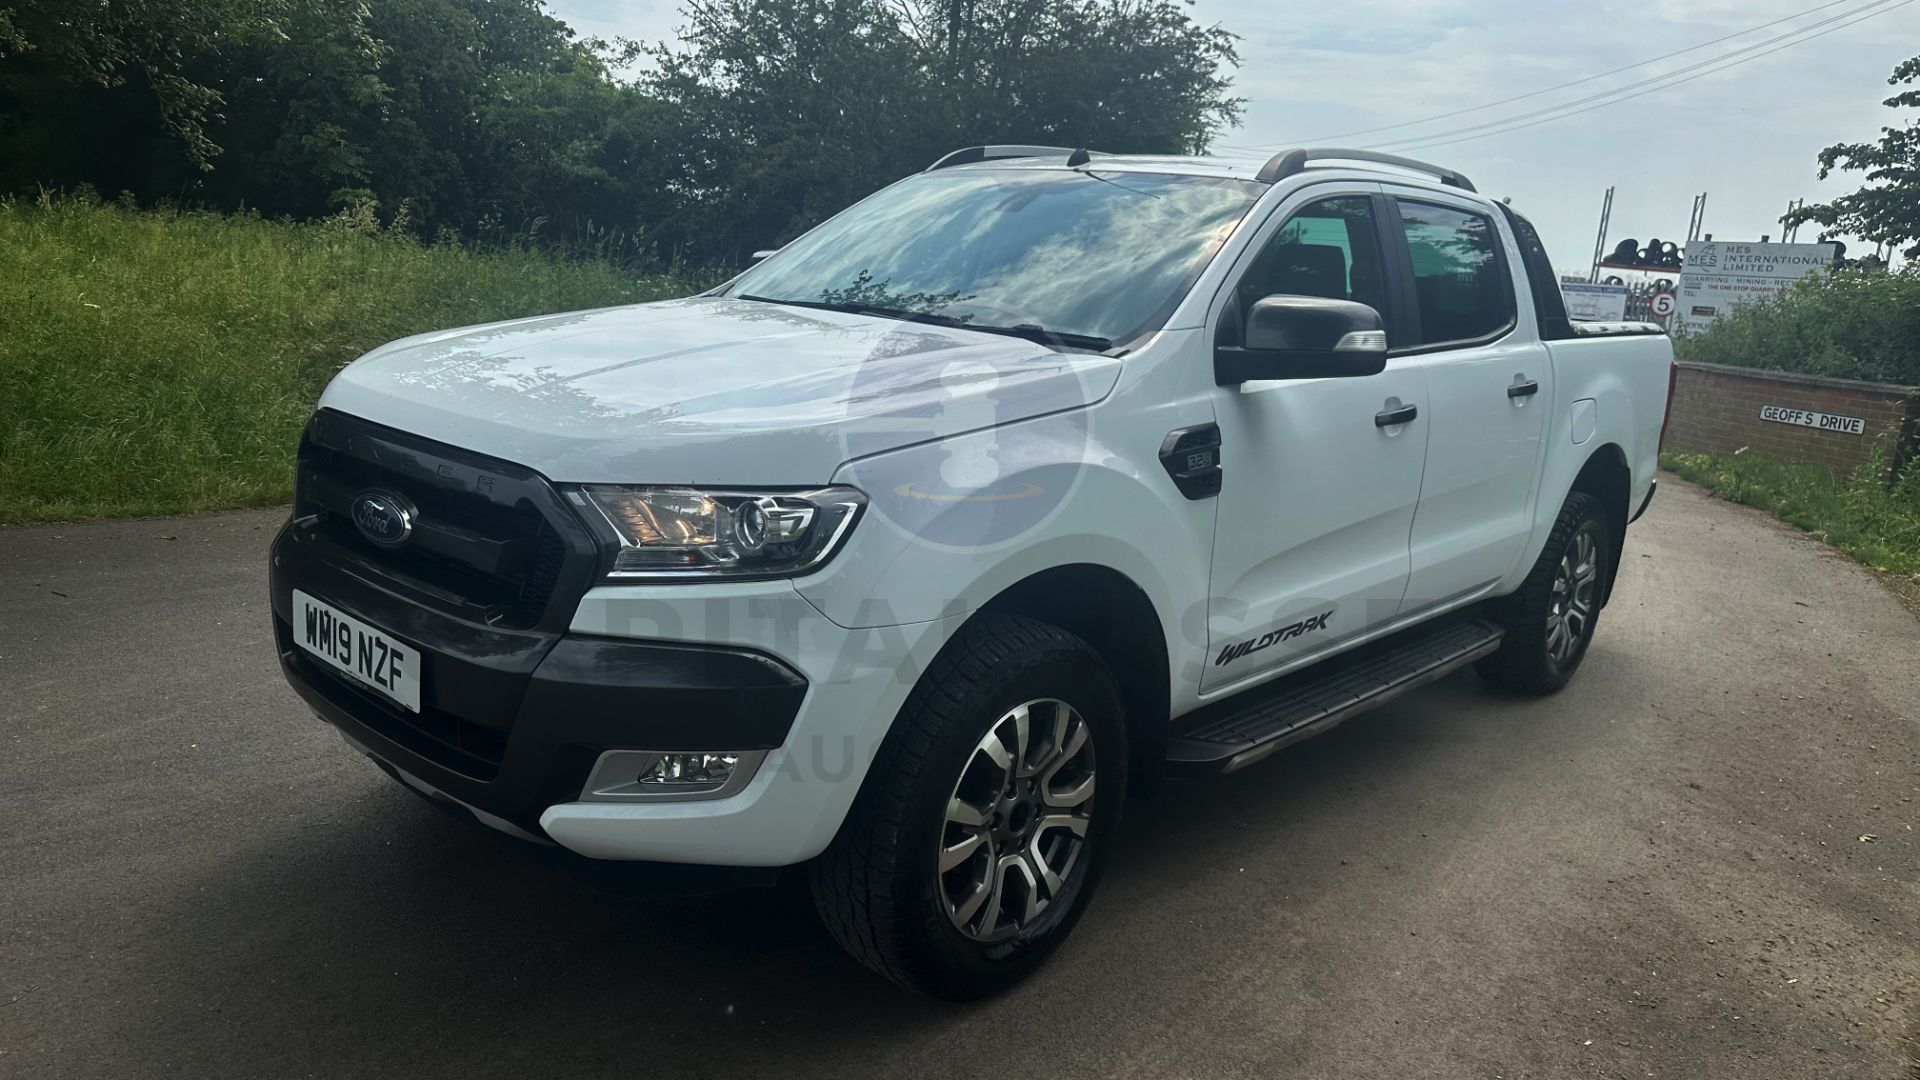 (ON SALE) FORD RANGER *WILDTRAK* DOUBLE CAB PICK-UP (2019 - EURO 6) 3.2 TDCI - AUTOMATIC (1 OWNER) - Image 5 of 50